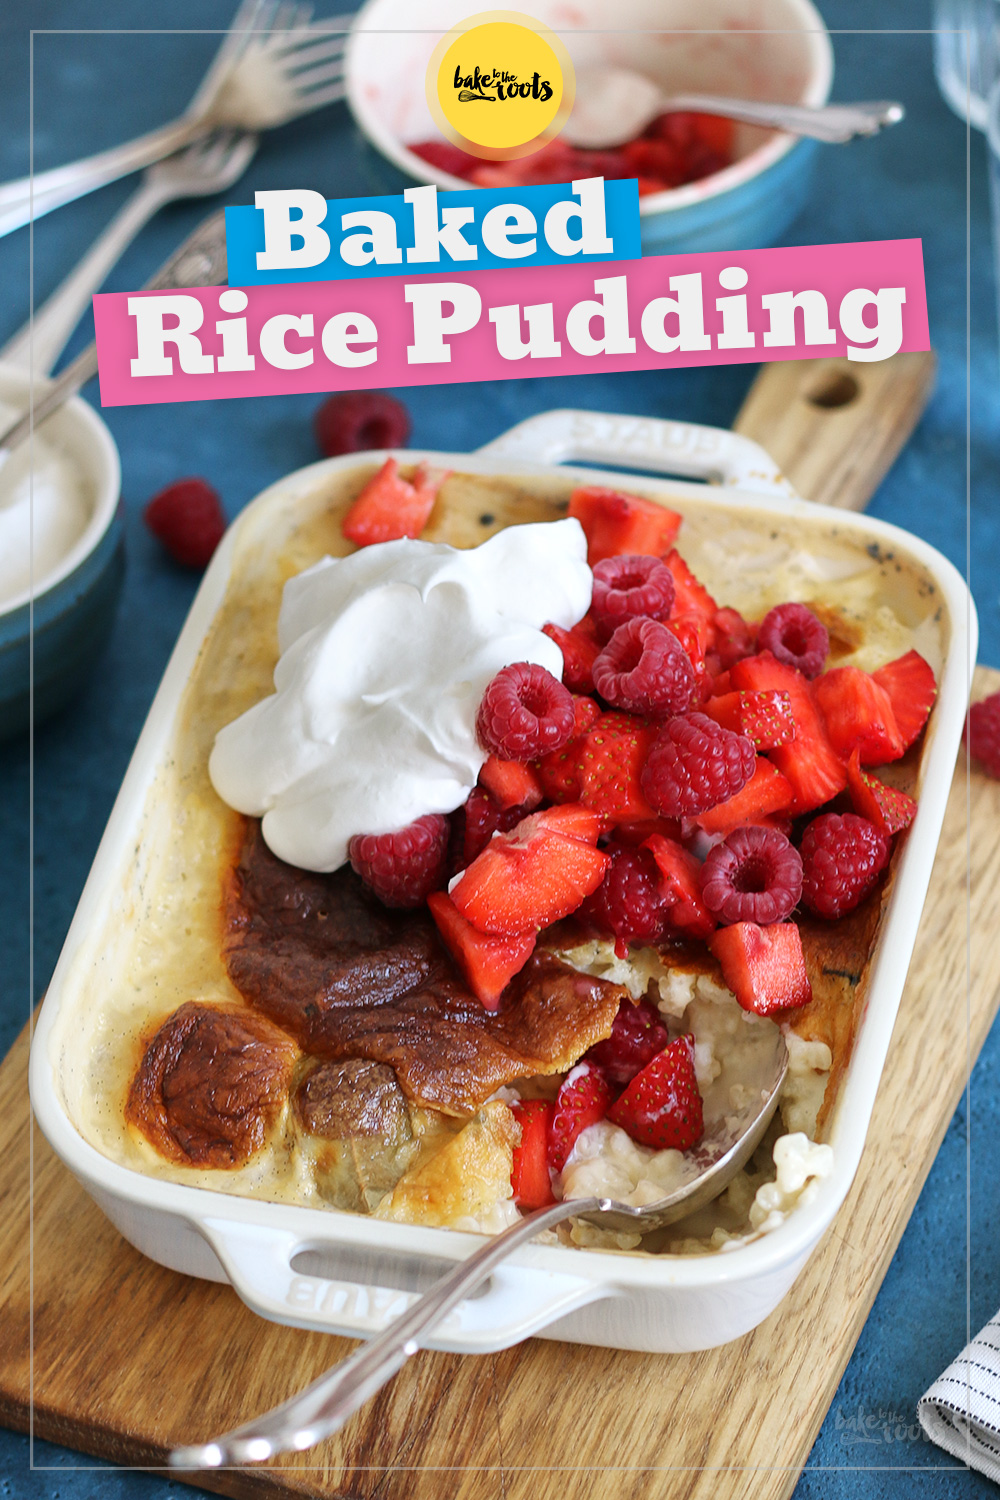 Baked Rice Pudding with Berries | Bake to the roots